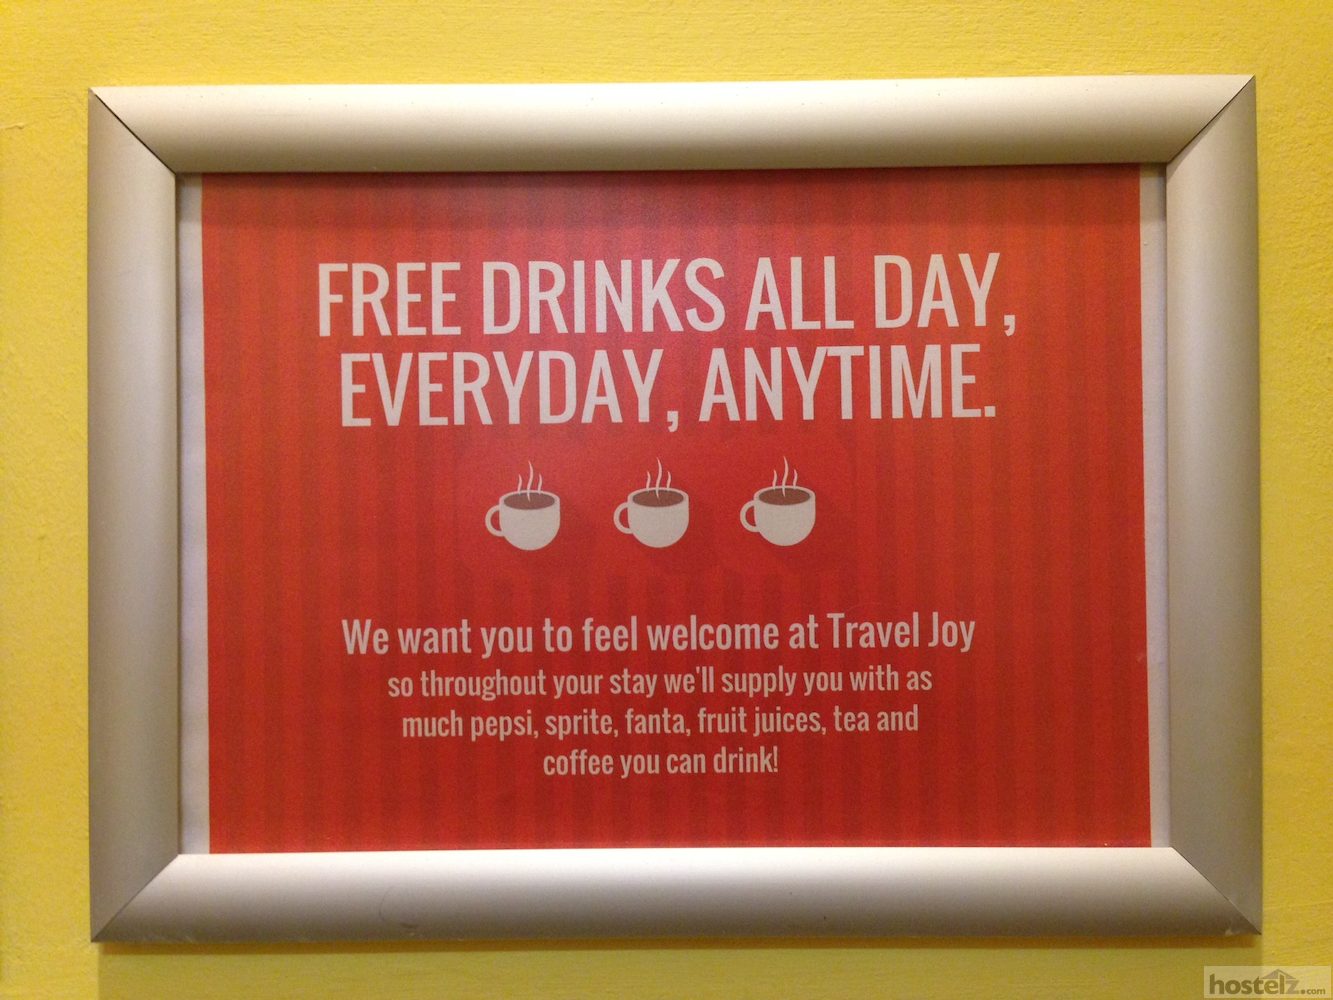 Free drinks throughout stay